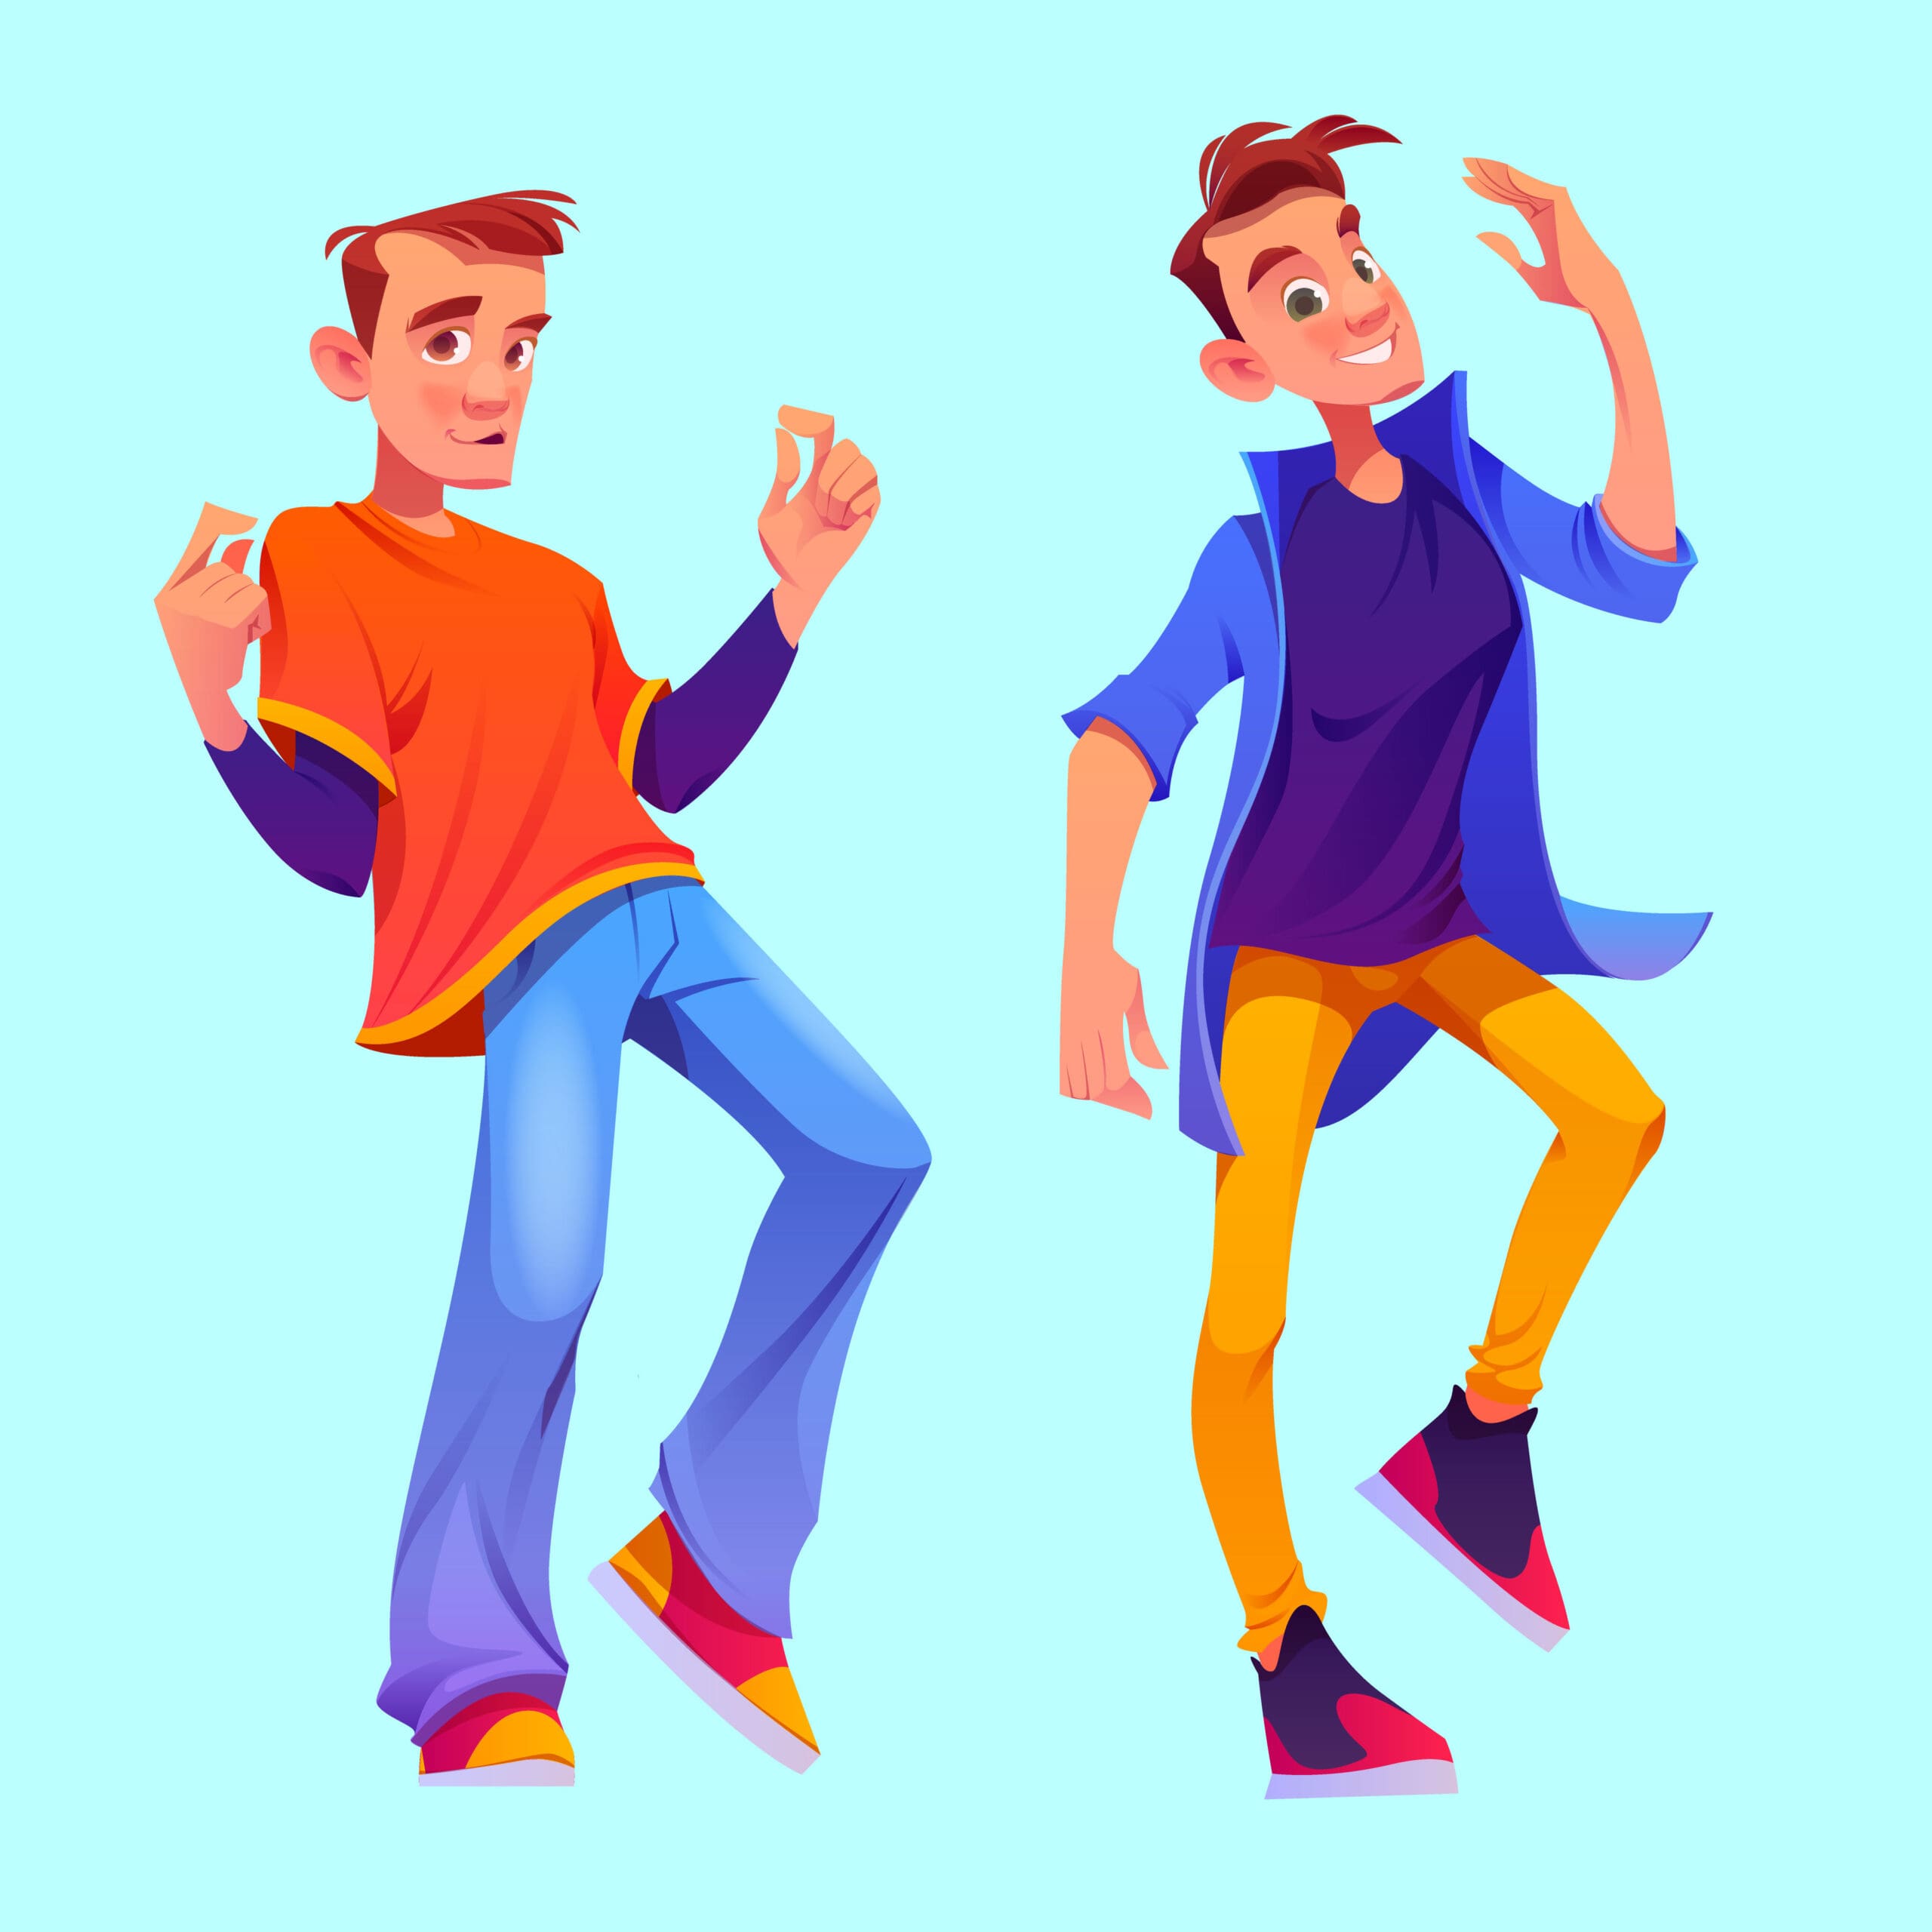 Cartoon graphic of two necks wearing sunglasses and dancing.